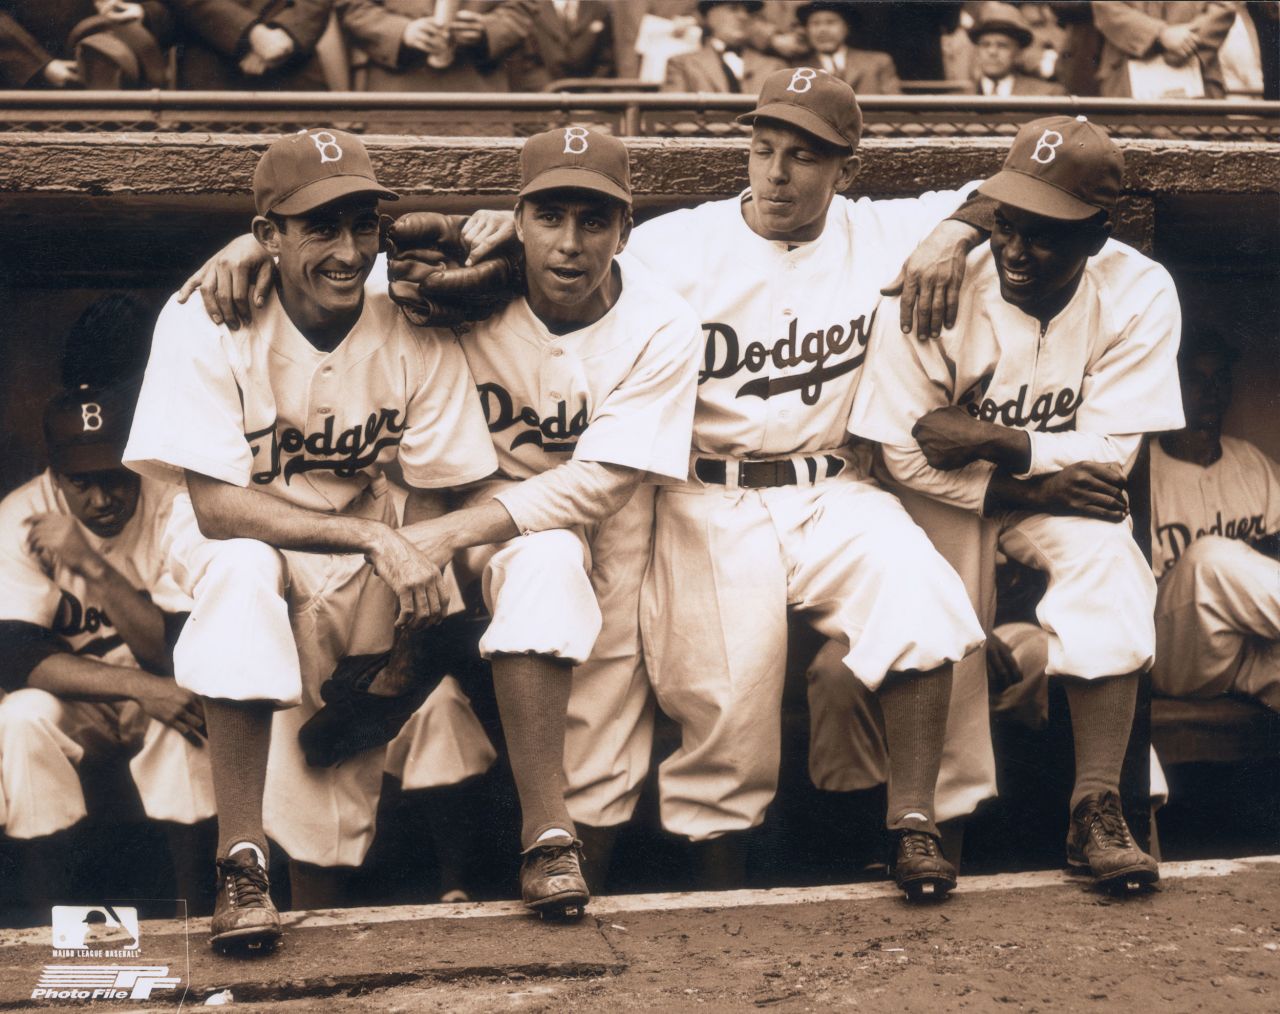 Robinson poses in the dugout with Dodgers teammates as he makes his historic debut on April 15, 1947. With Robinson, from left, are Johnny "Spider" Jorgensen, Harold "Pee Wee" Reese and Eddie Stanky.